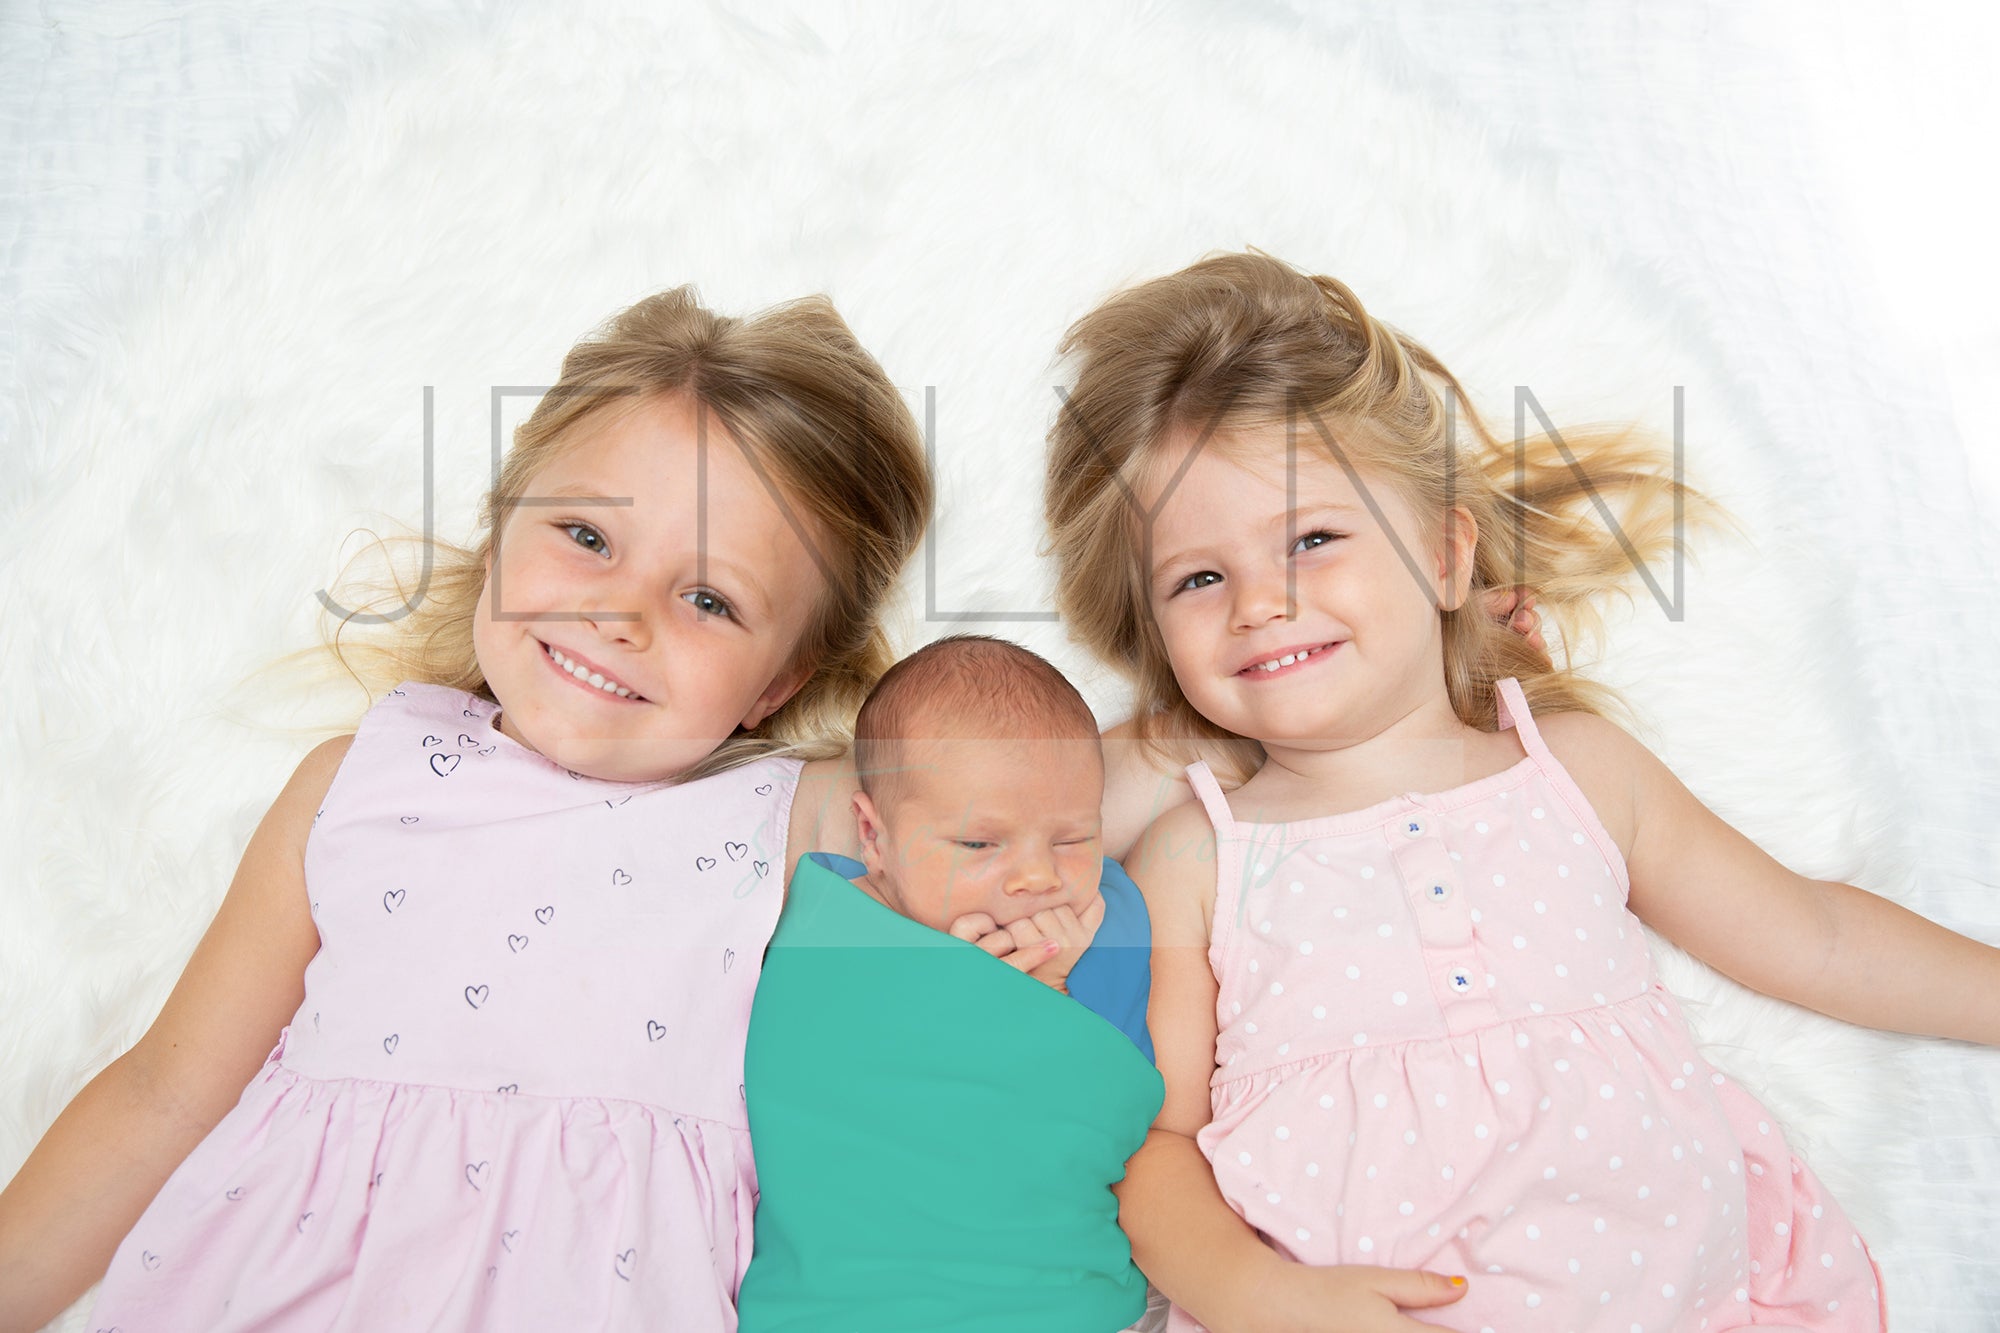 Jersey Baby Boy with Sisters Blanket Mockup #5 PSD